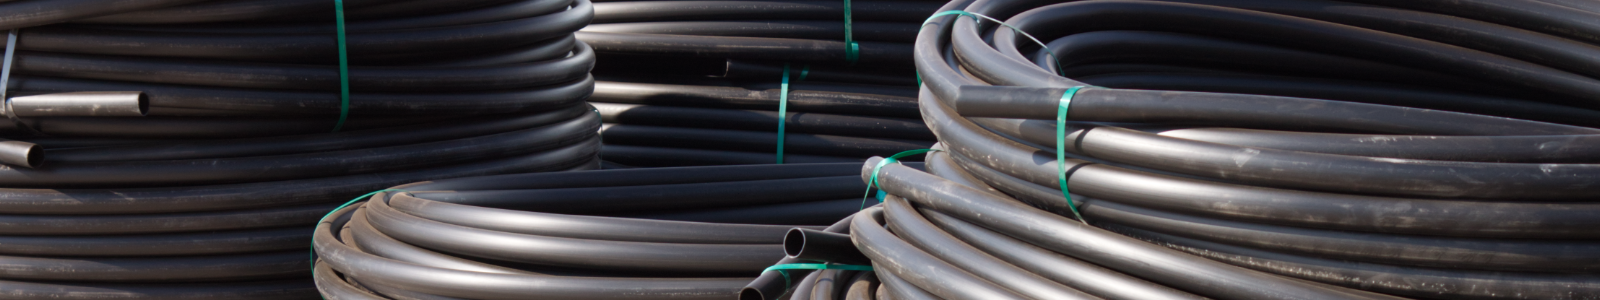 Low Density Polyethylene Pipes for irrigation